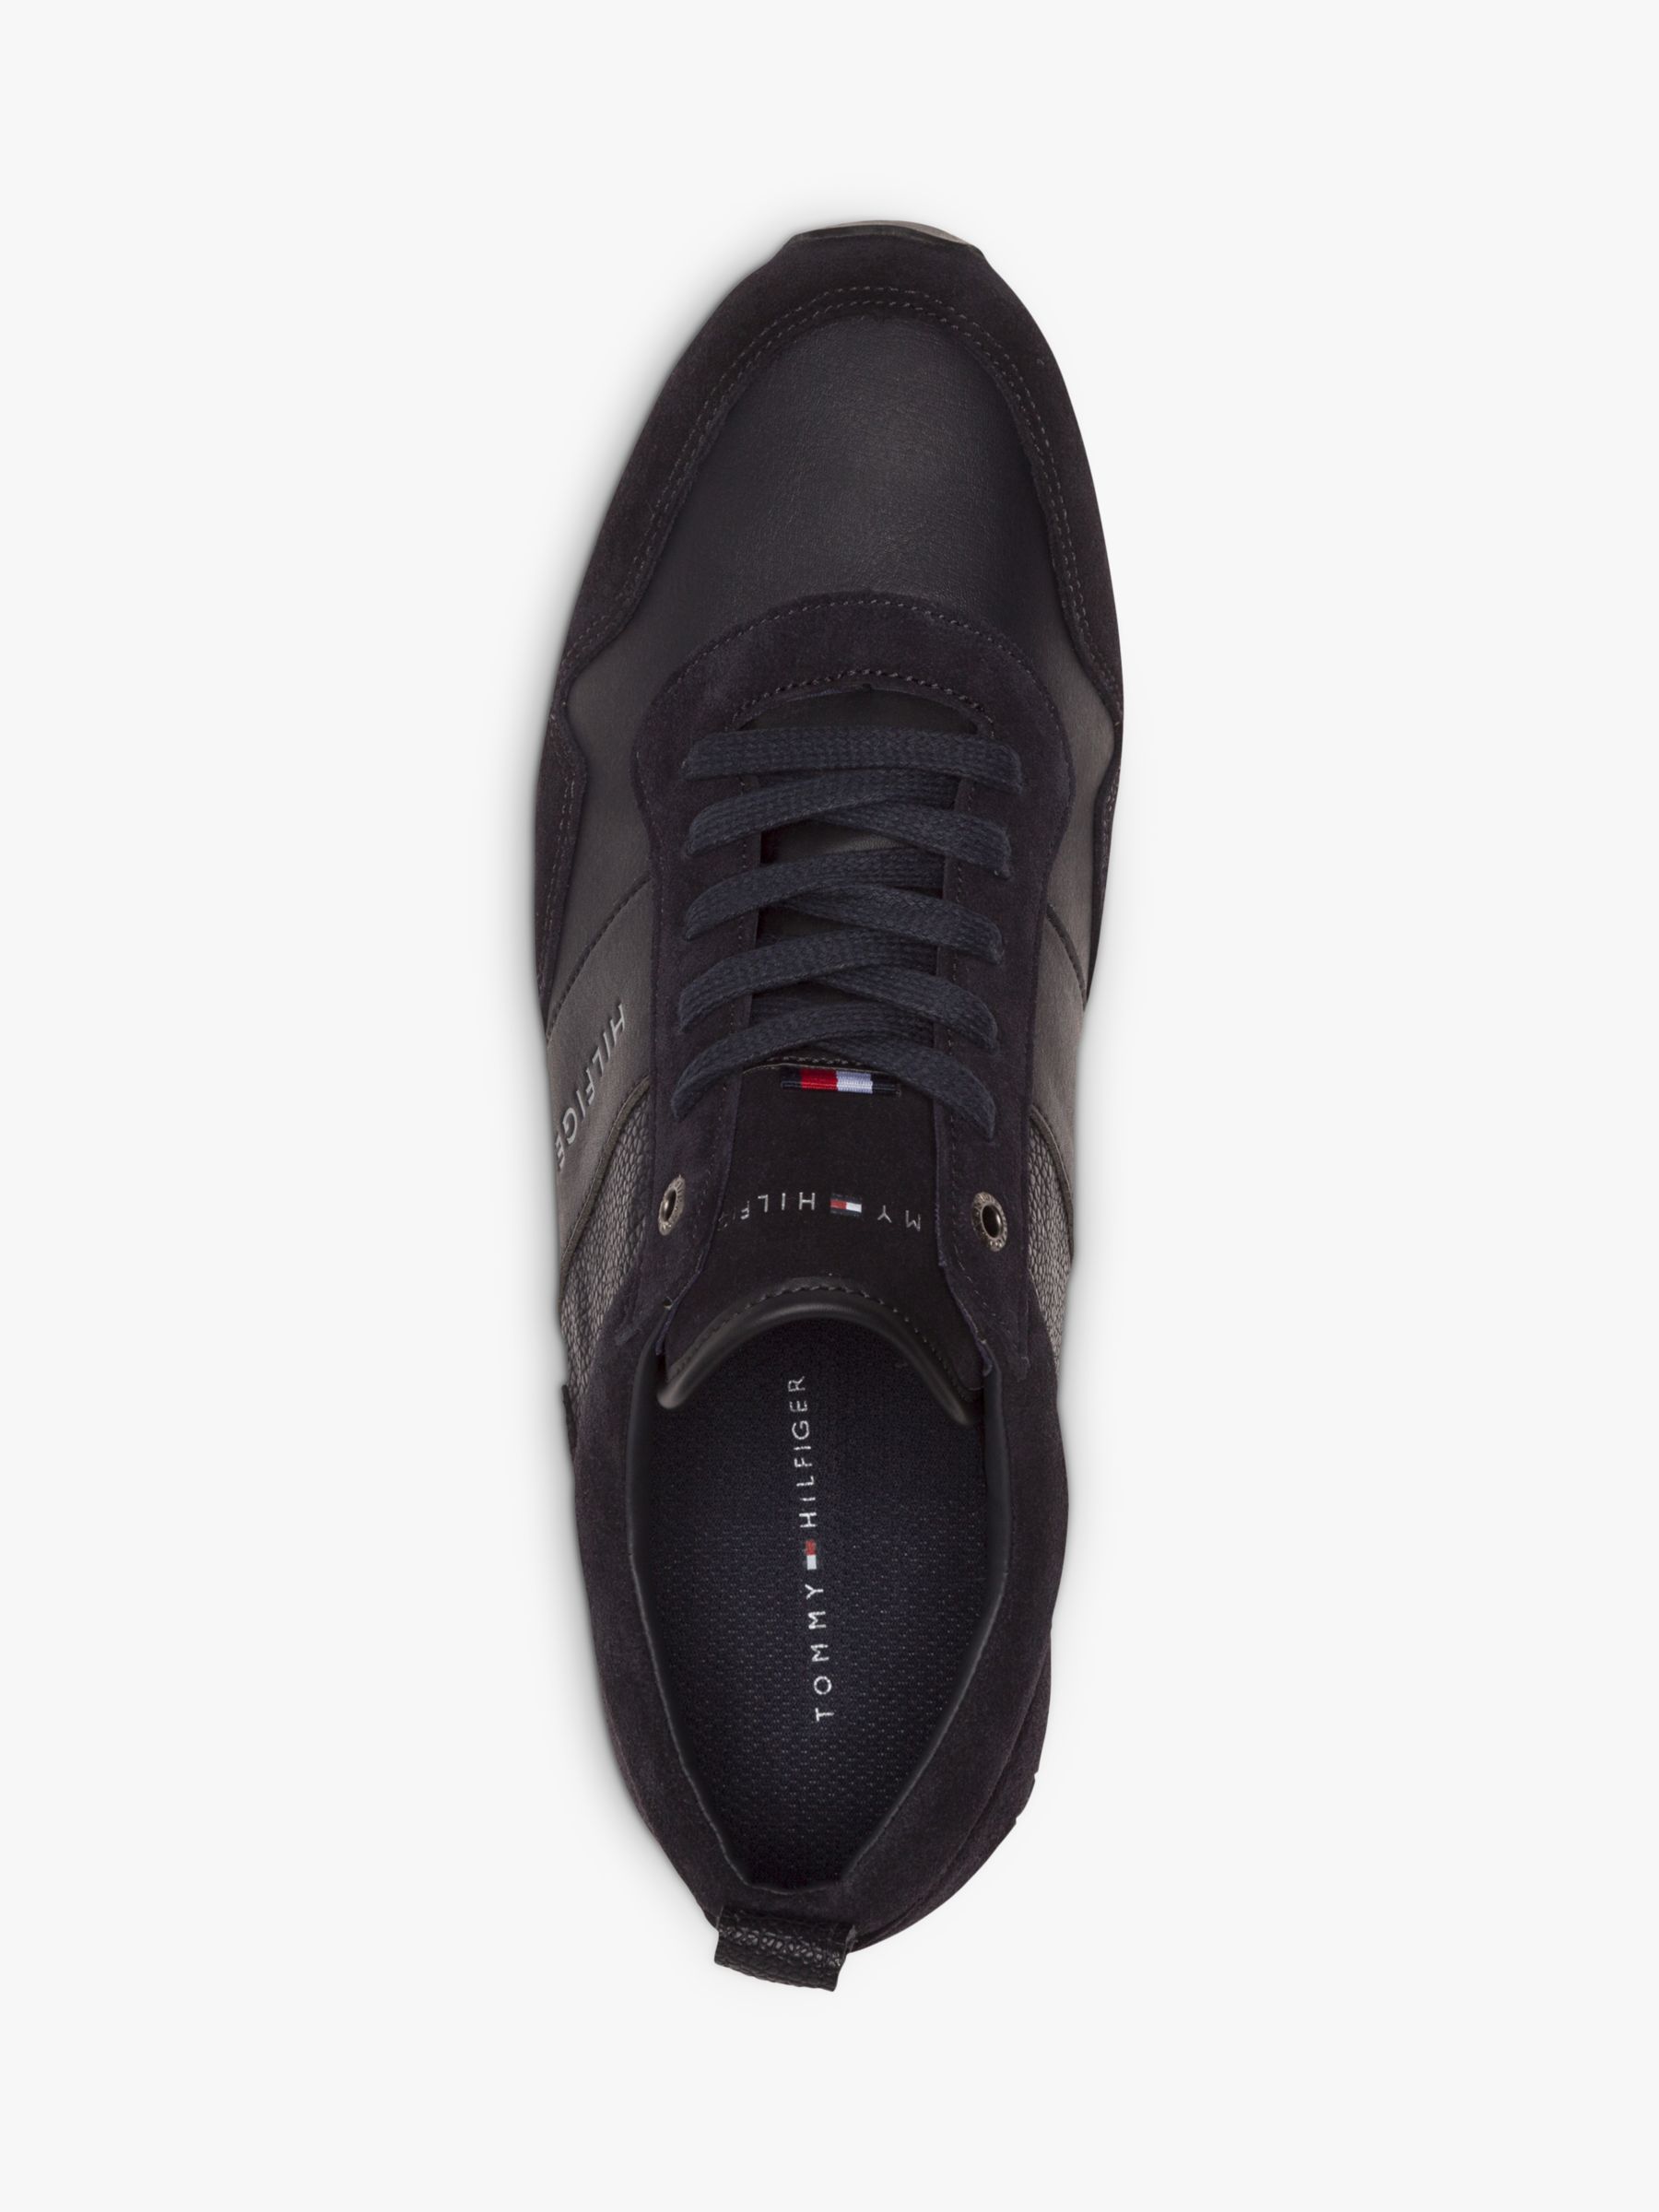 Tommy Hilfiger Iconic Trainers, Midnight, 6.5